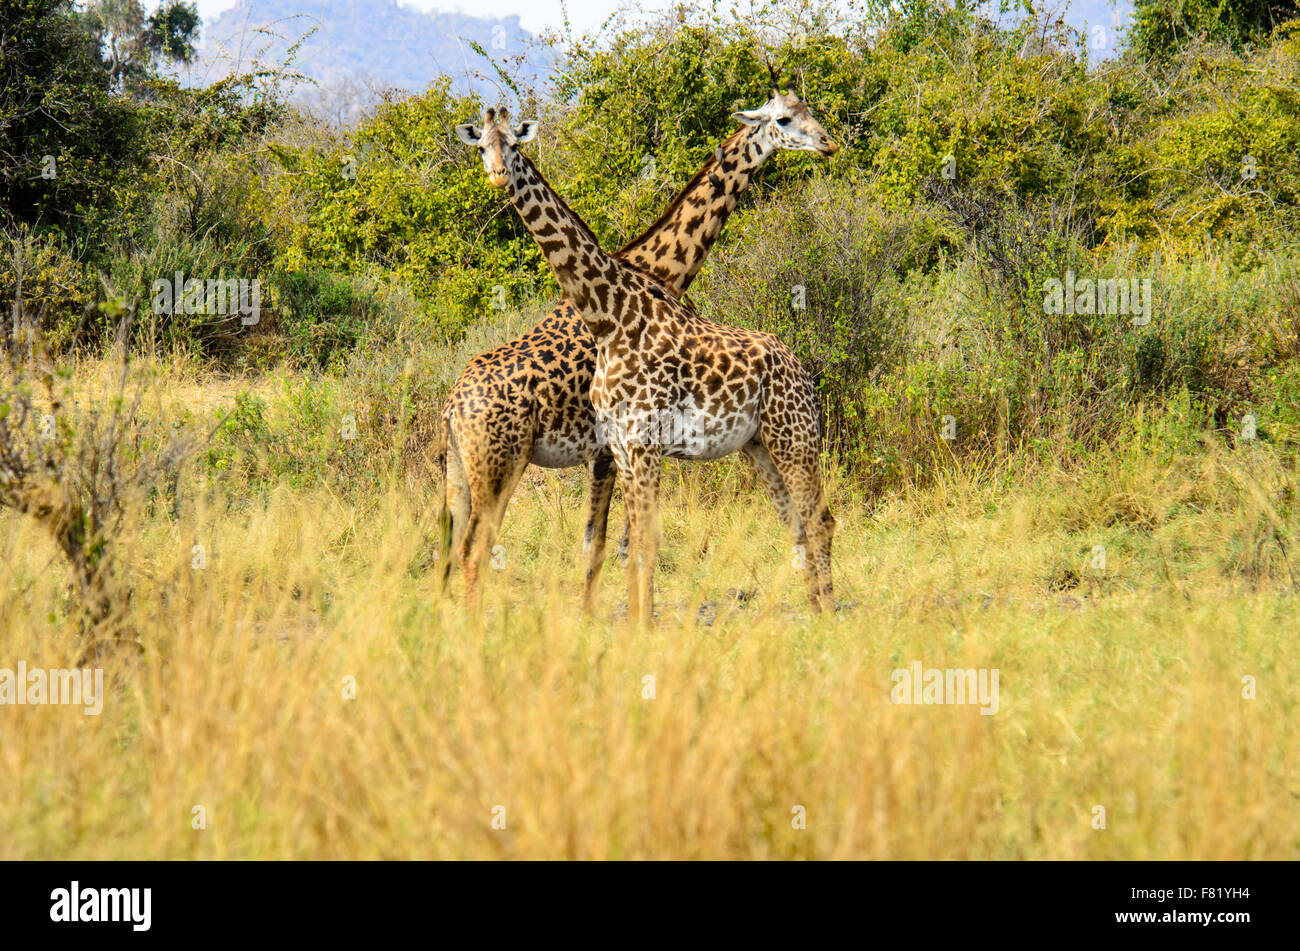 two giraffes side by side facing opposite directions Stock Photo